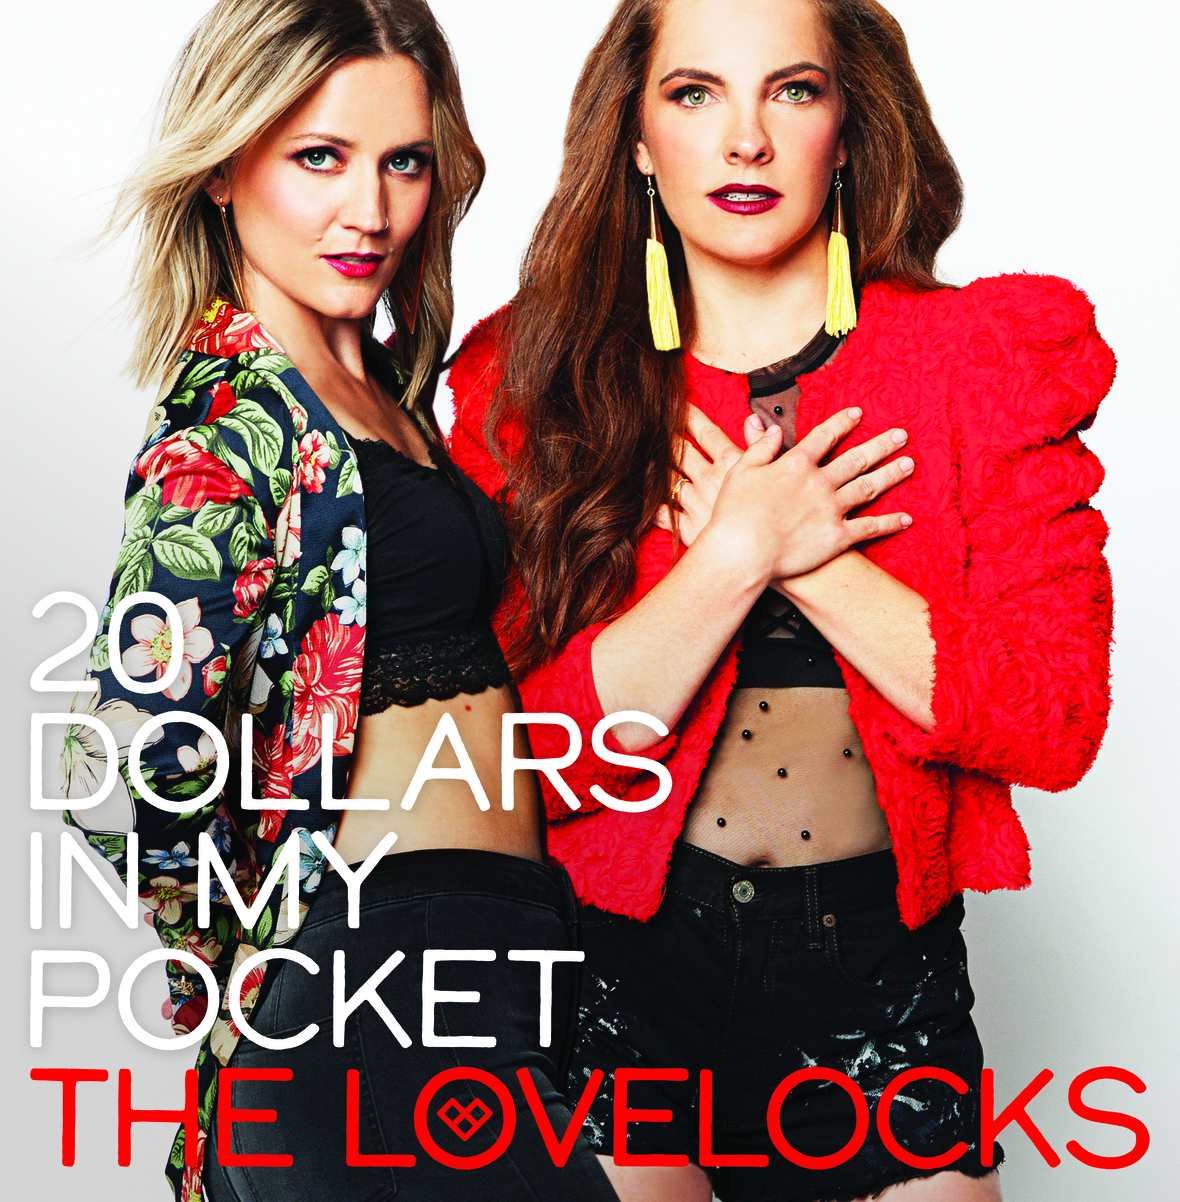 20 Dollars In My Pocket The Lovelocks Ep Review And Interview Thereviewsarein Twenty dollars in my pocket clean version. 20 dollars in my pocket the lovelocks